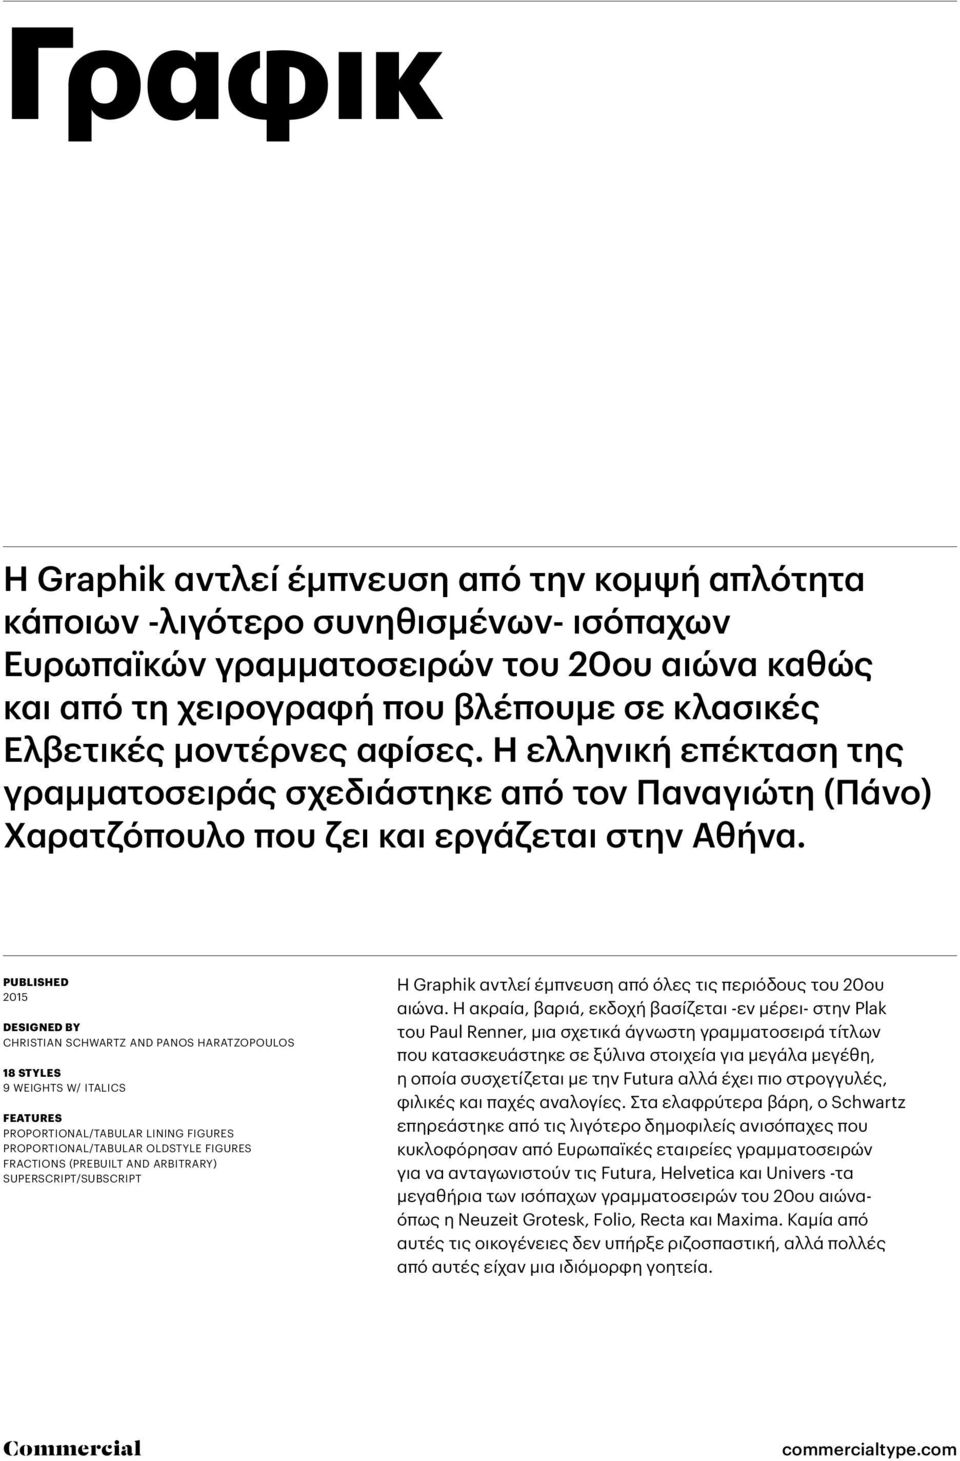 PUBLISHED 2015 DESIGNED BY CHRISTIAN SCHWARTZ AND PANOS HARATZOPOULOS 18 STYLES 9 WEIGHTS W/ ITALICS FEATURES PROPORTIONAL/TABULAR LINING FIGURES PROPORTIONAL/TABULAR OLDSTYLE FIGURES FRACTIONS